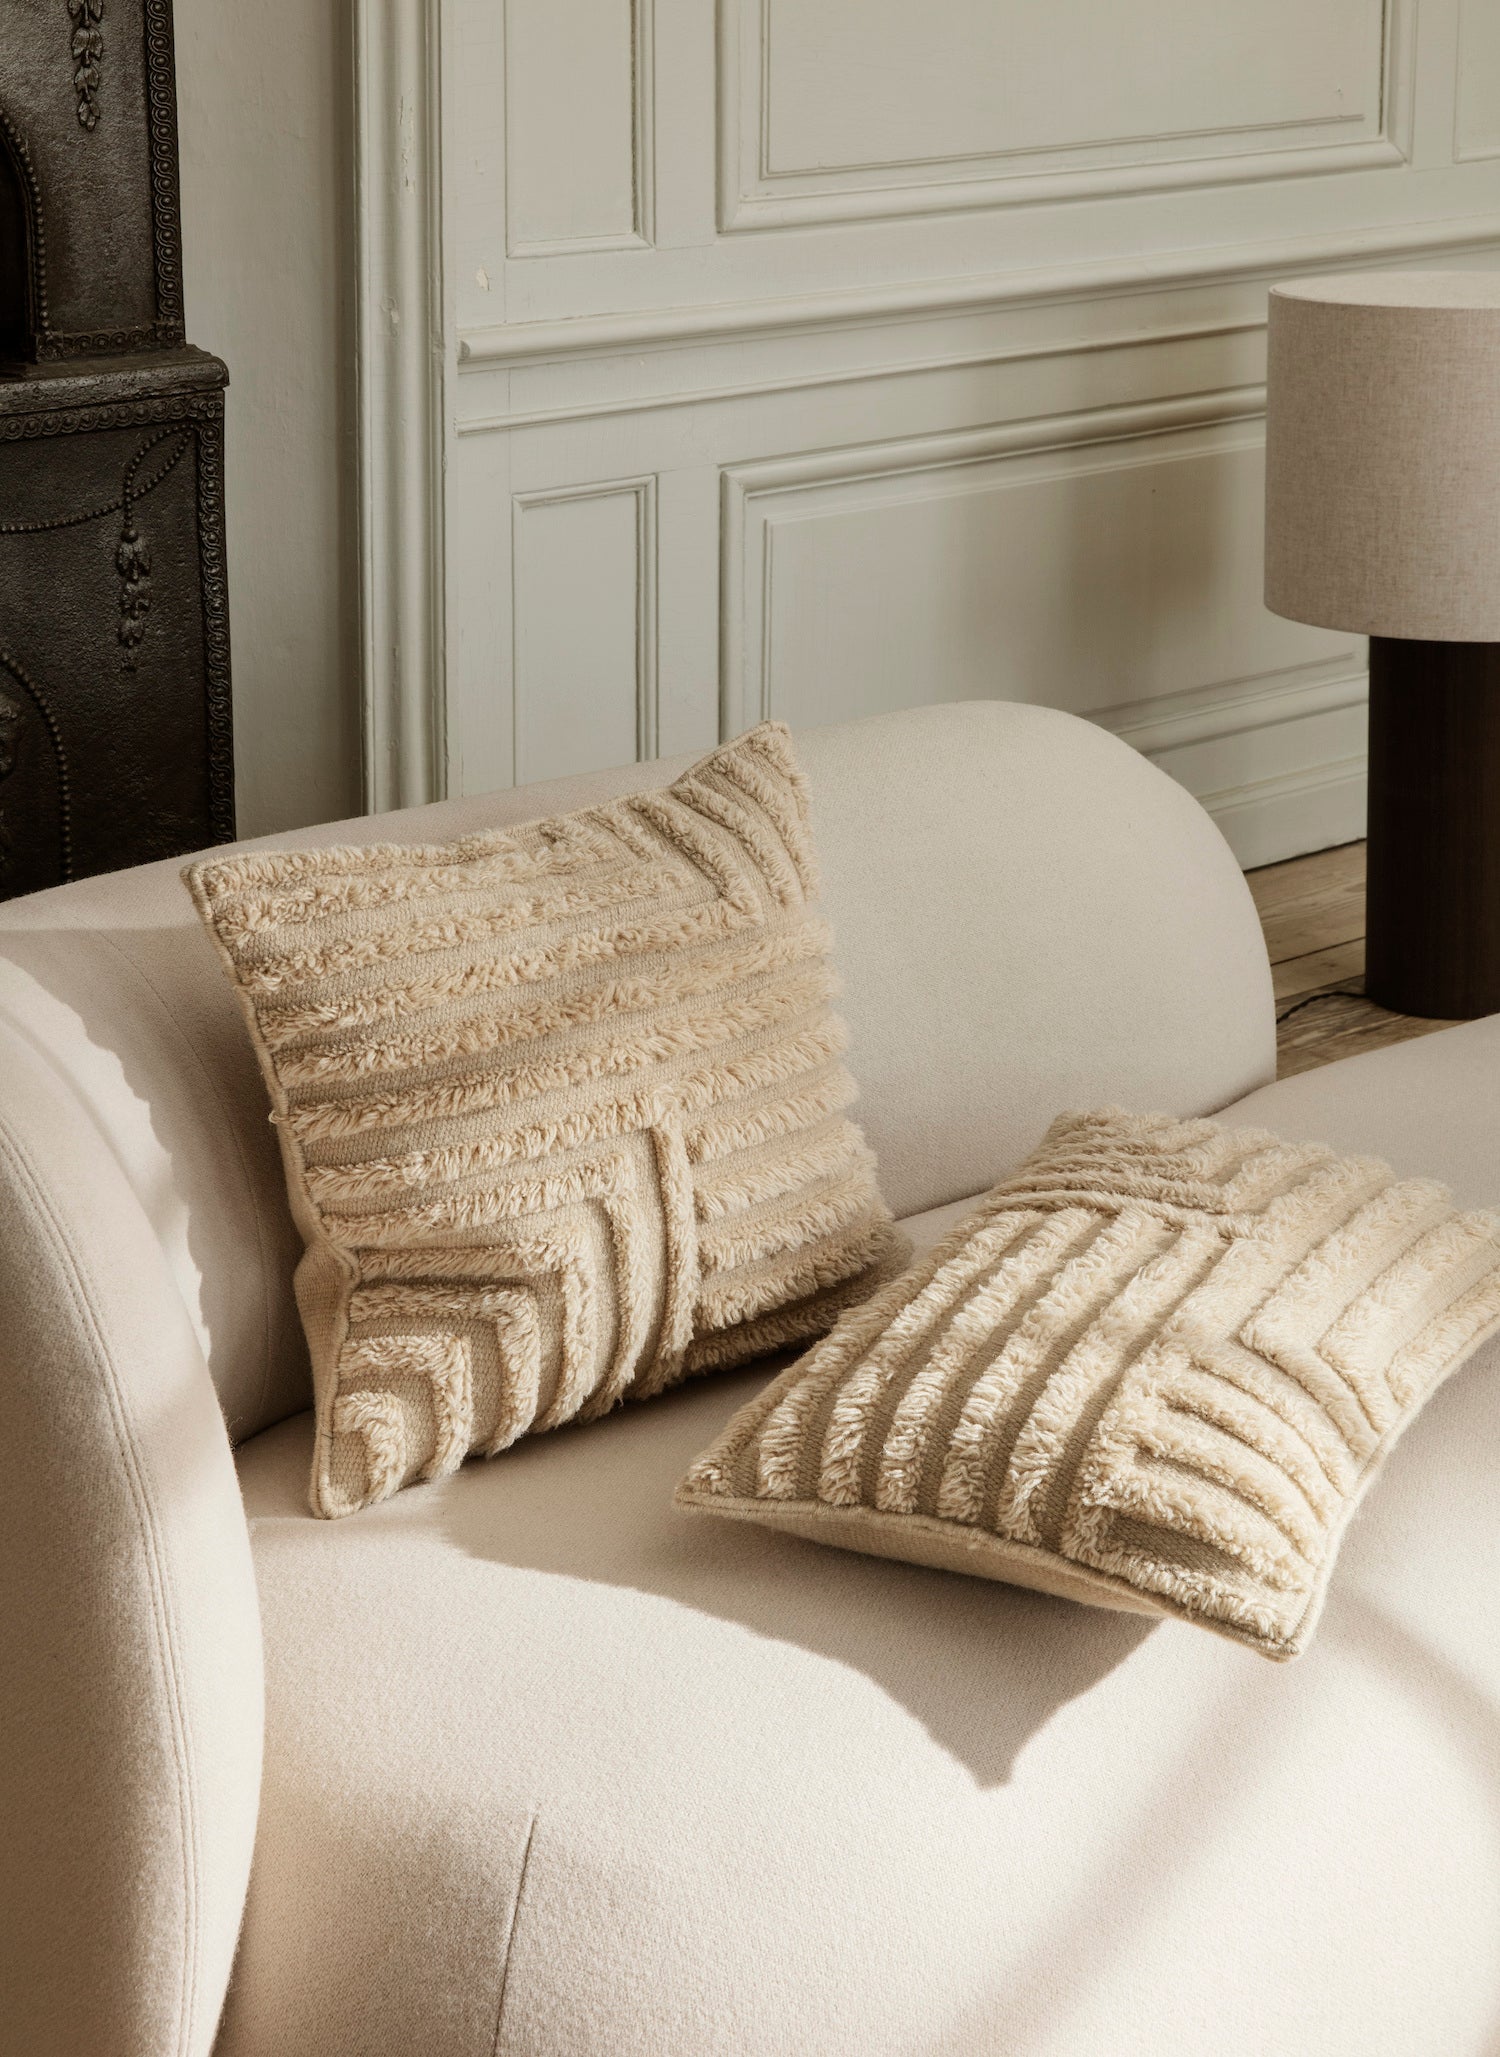 Crease Wool Cushion. Drawing inspiration from the clean lines found in modern architecture, the Crease Wool Cushion has a soft, understated expression.